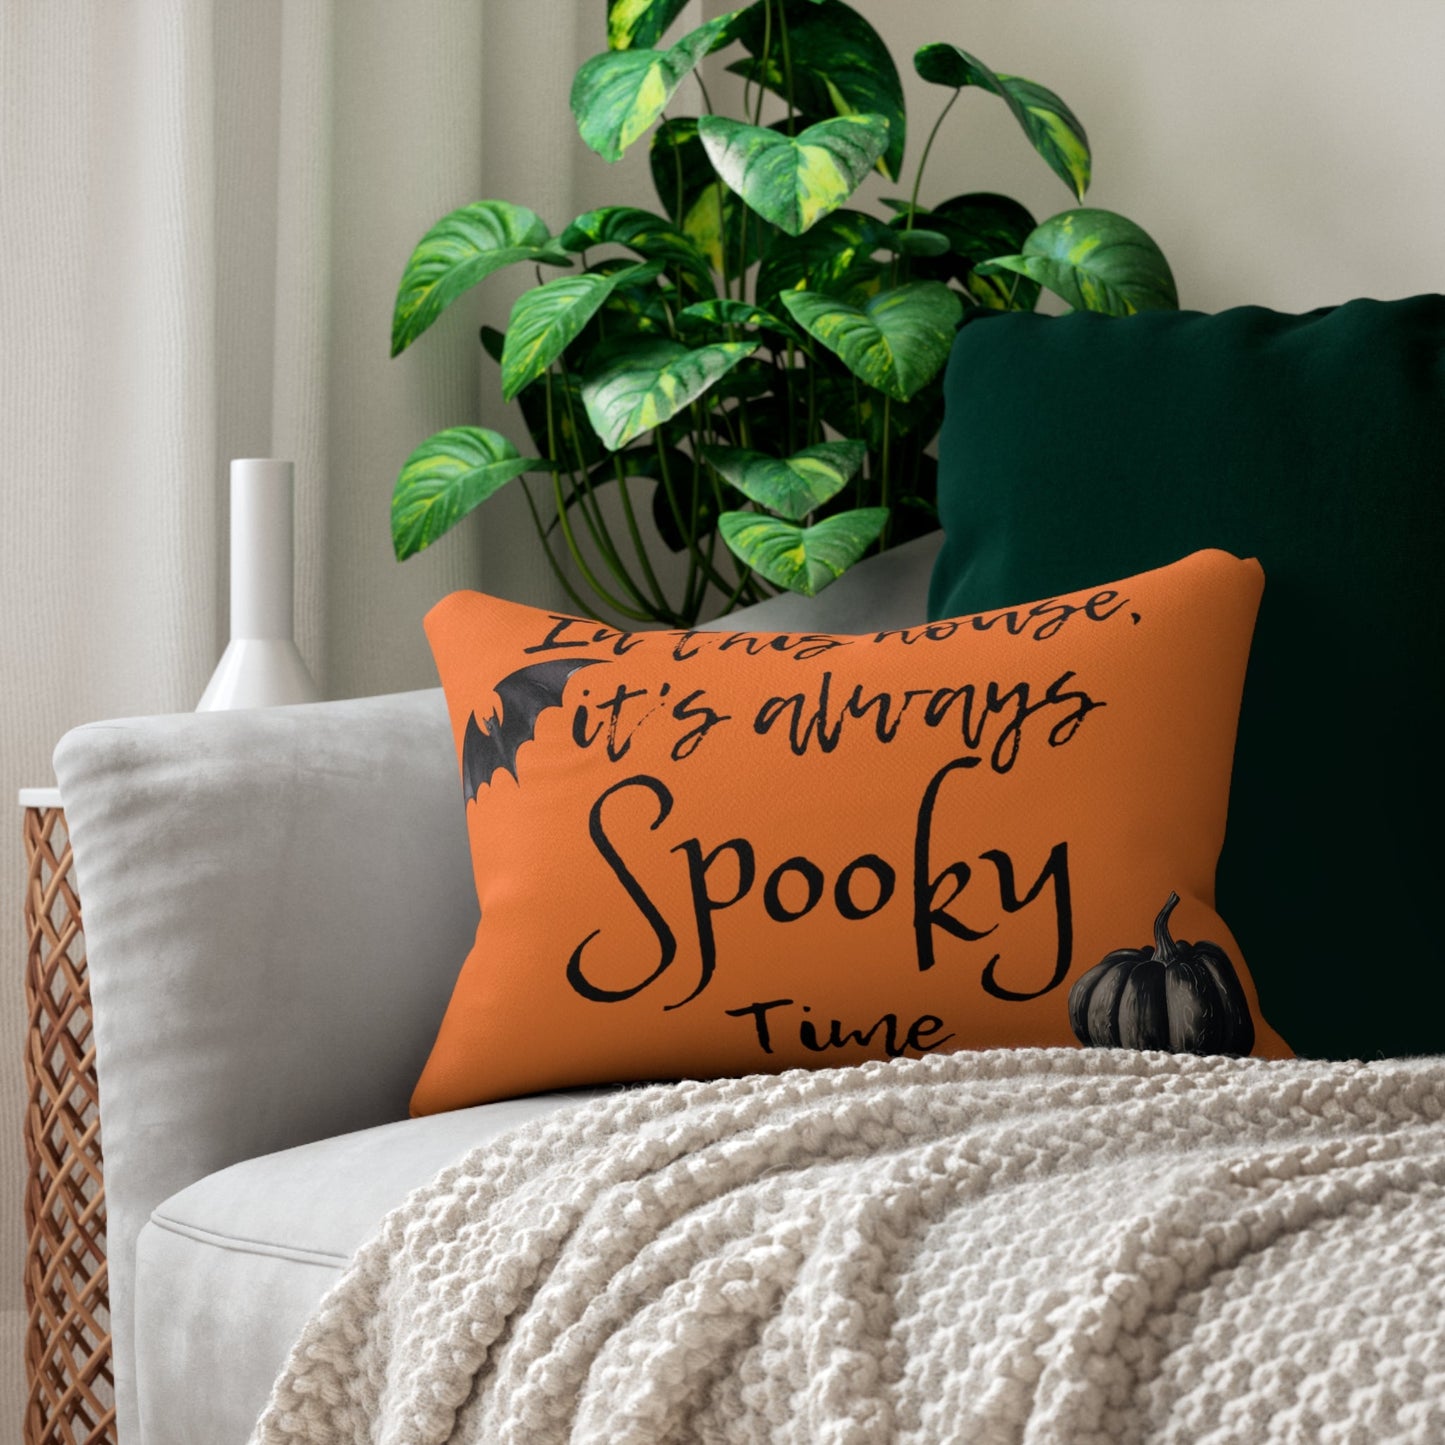 In This House It's Always Spooky Time Lumbar Throw PillowHome DecorVTZdesigns20" × 14"All Over PrintAOPbat